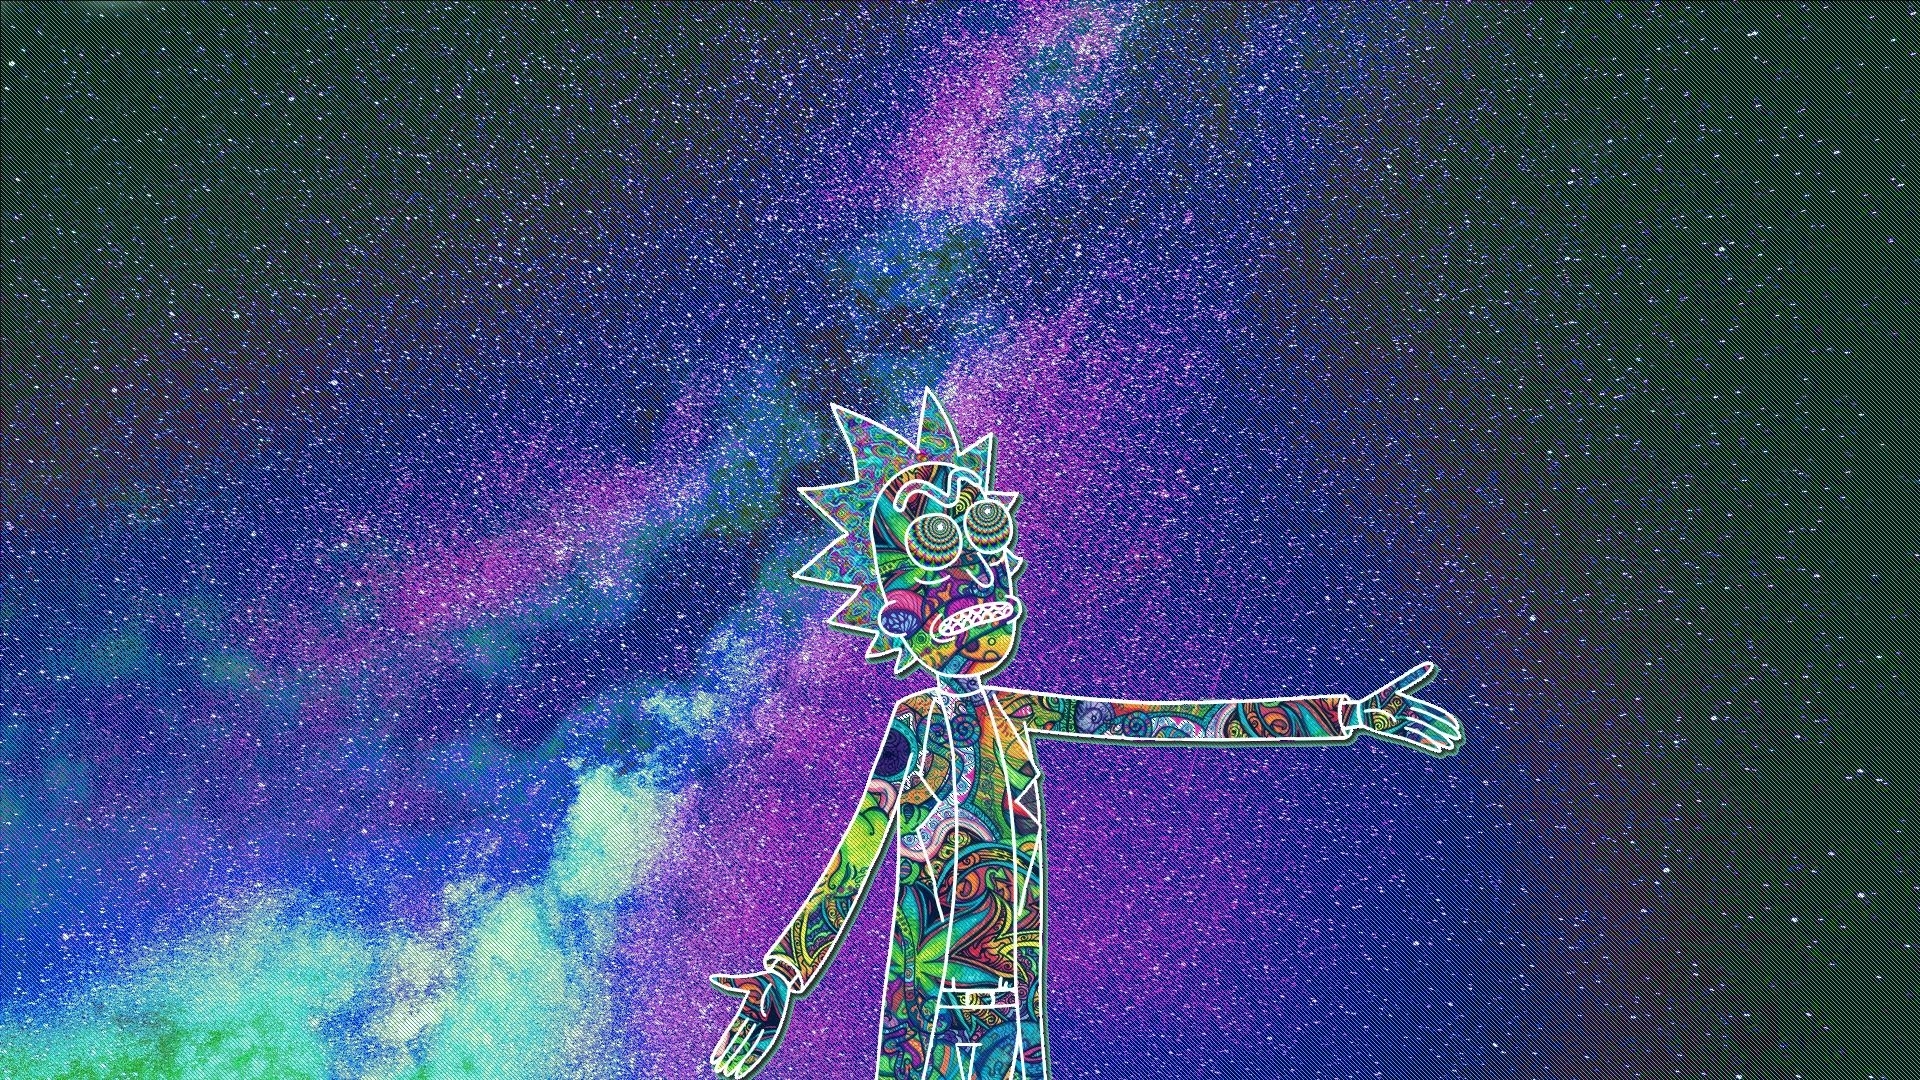 Title : i edited this trippy rick wallpaper for myself, figured some of you...